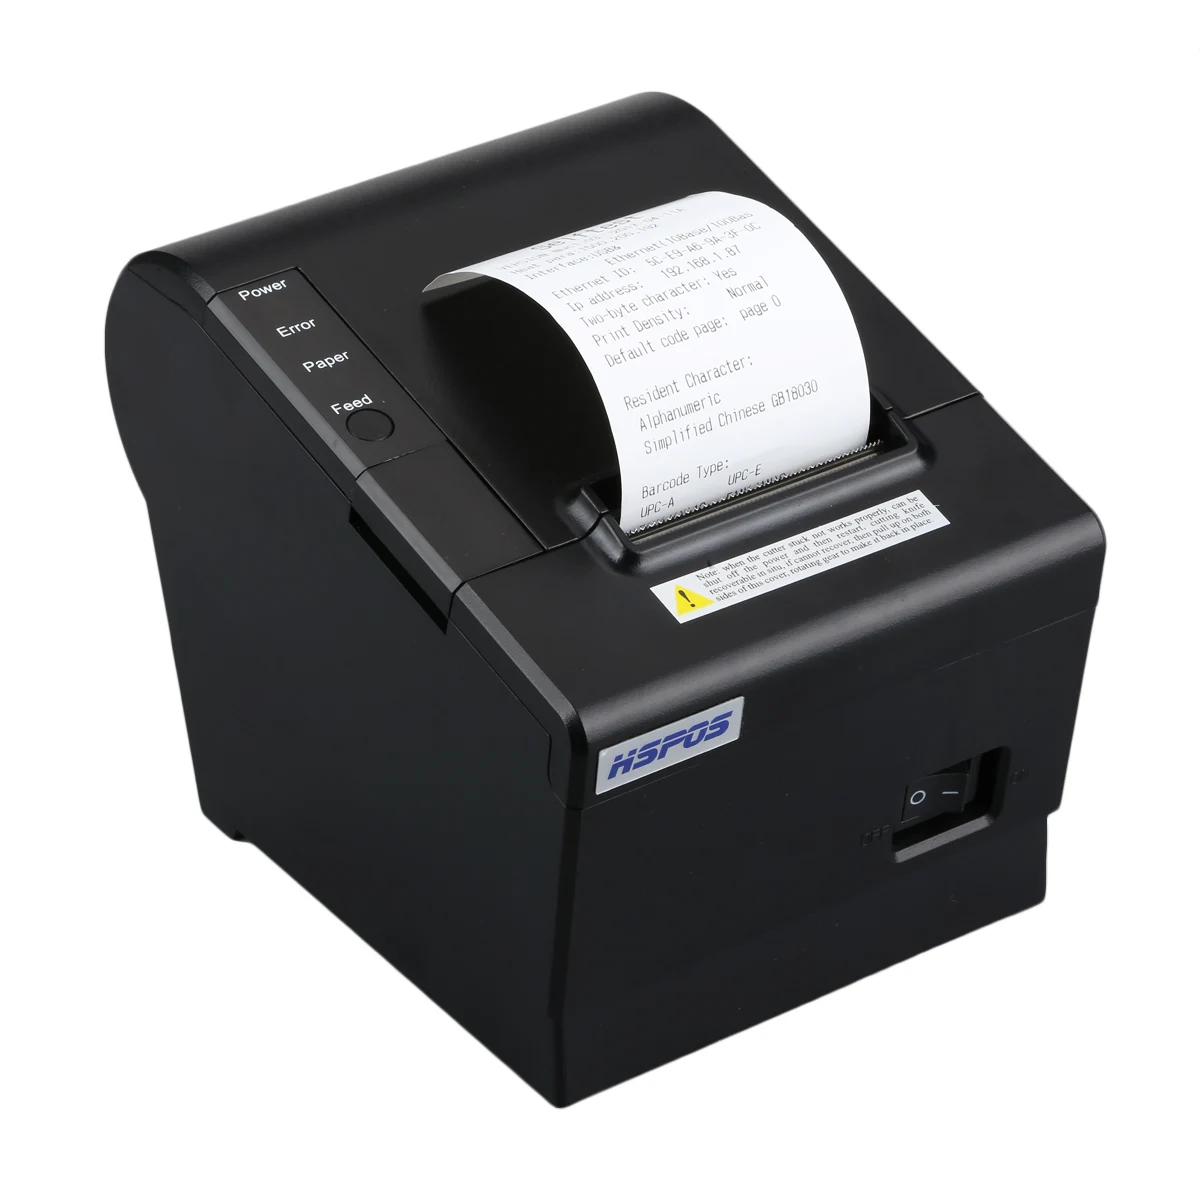 

MQTT print thermal receipt printer with cutter usb and lan port support multiple language printing K58CULG provide free sdk, Black color